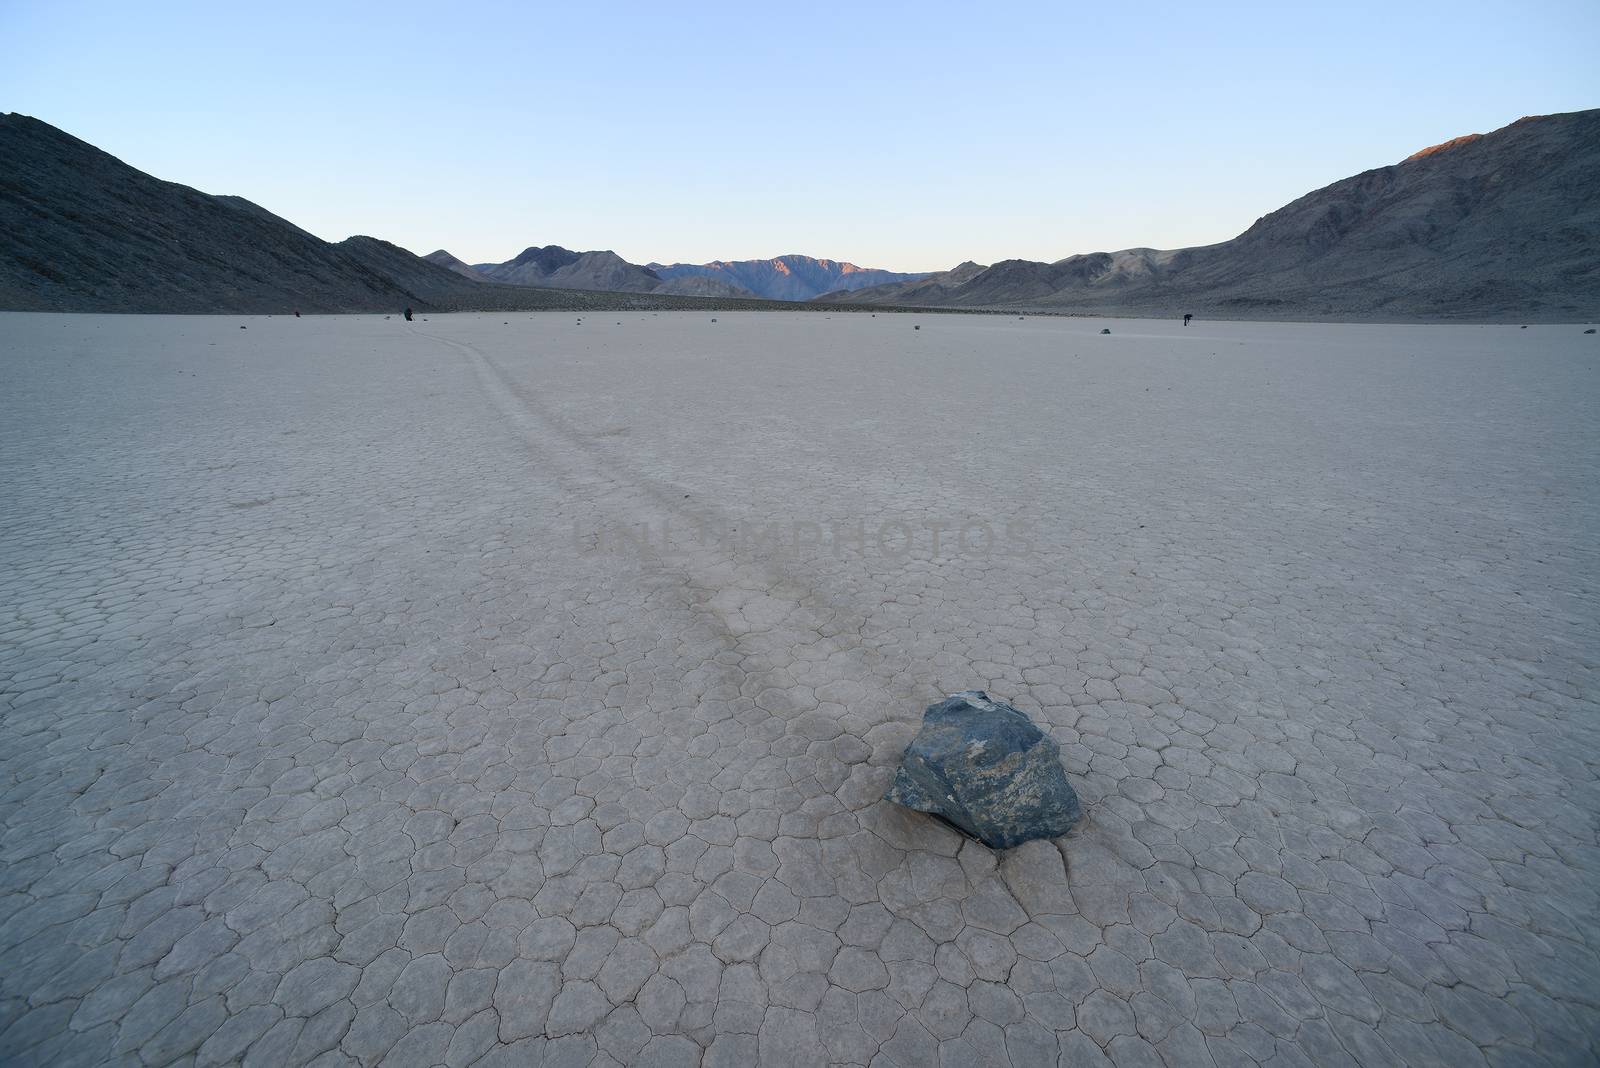 a famous moving rock at racetrack playa in death valley national park